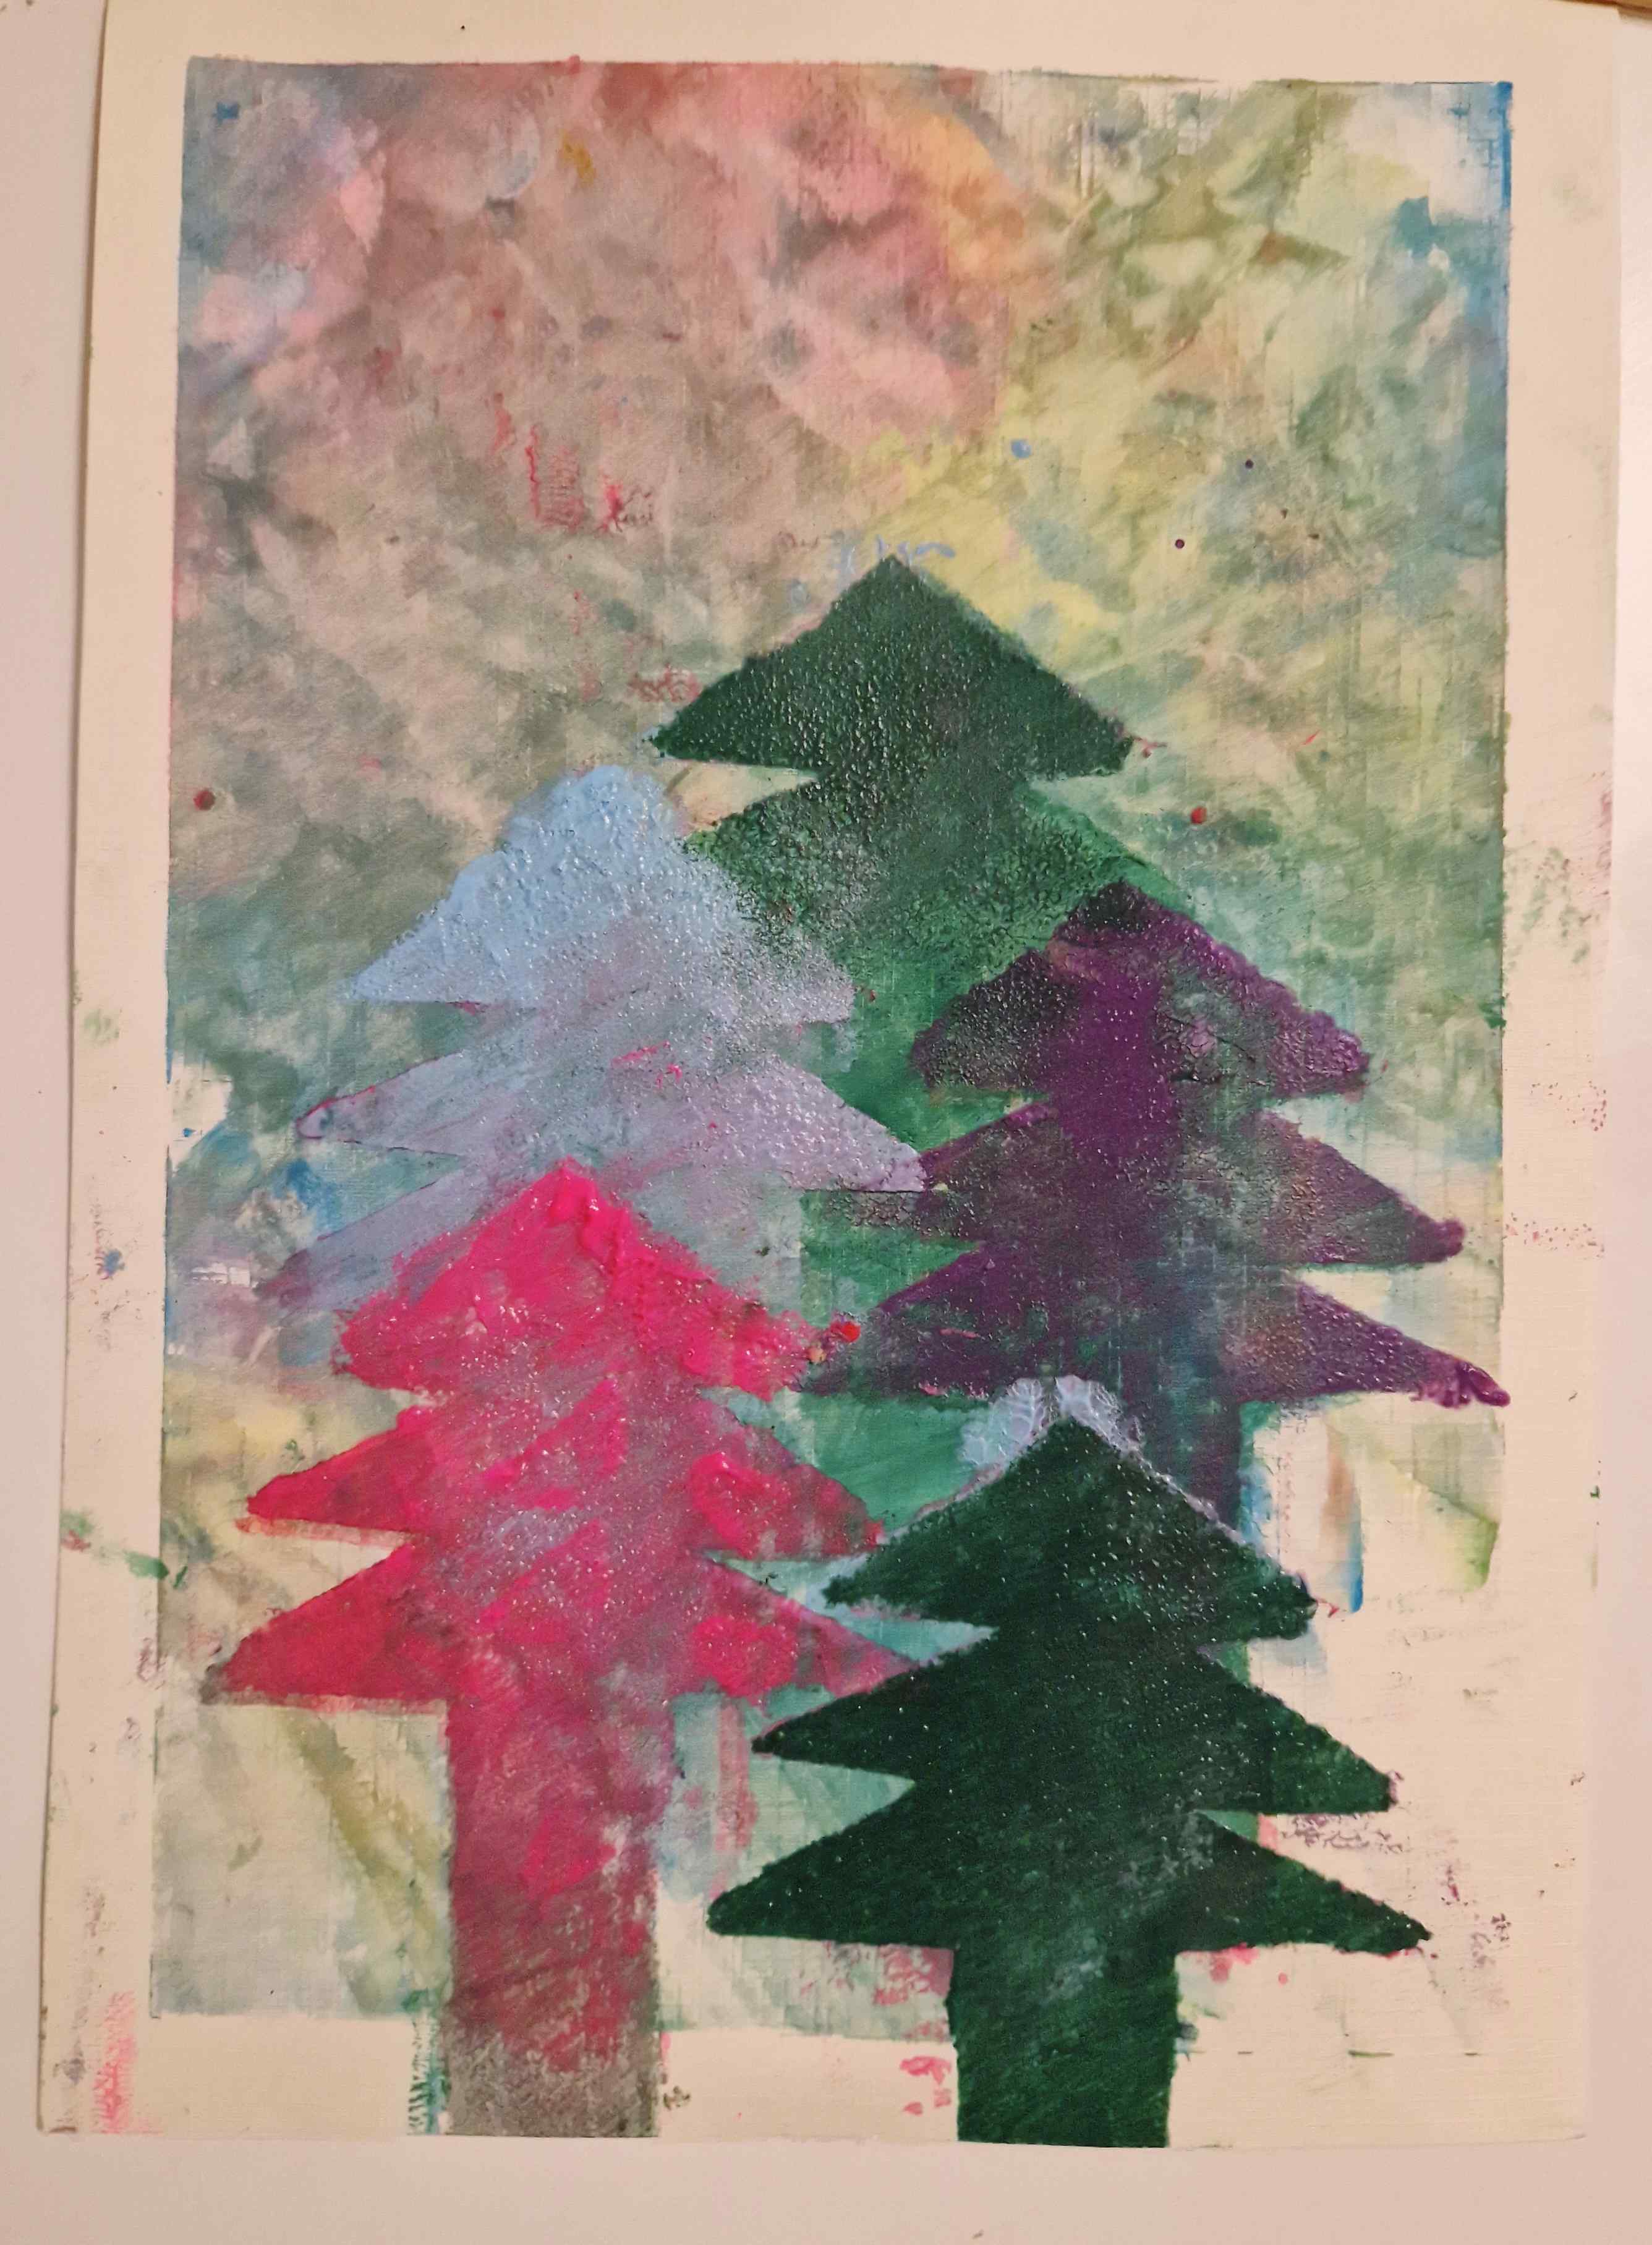 picture of a variety of xmas trees drawn by competition entrant